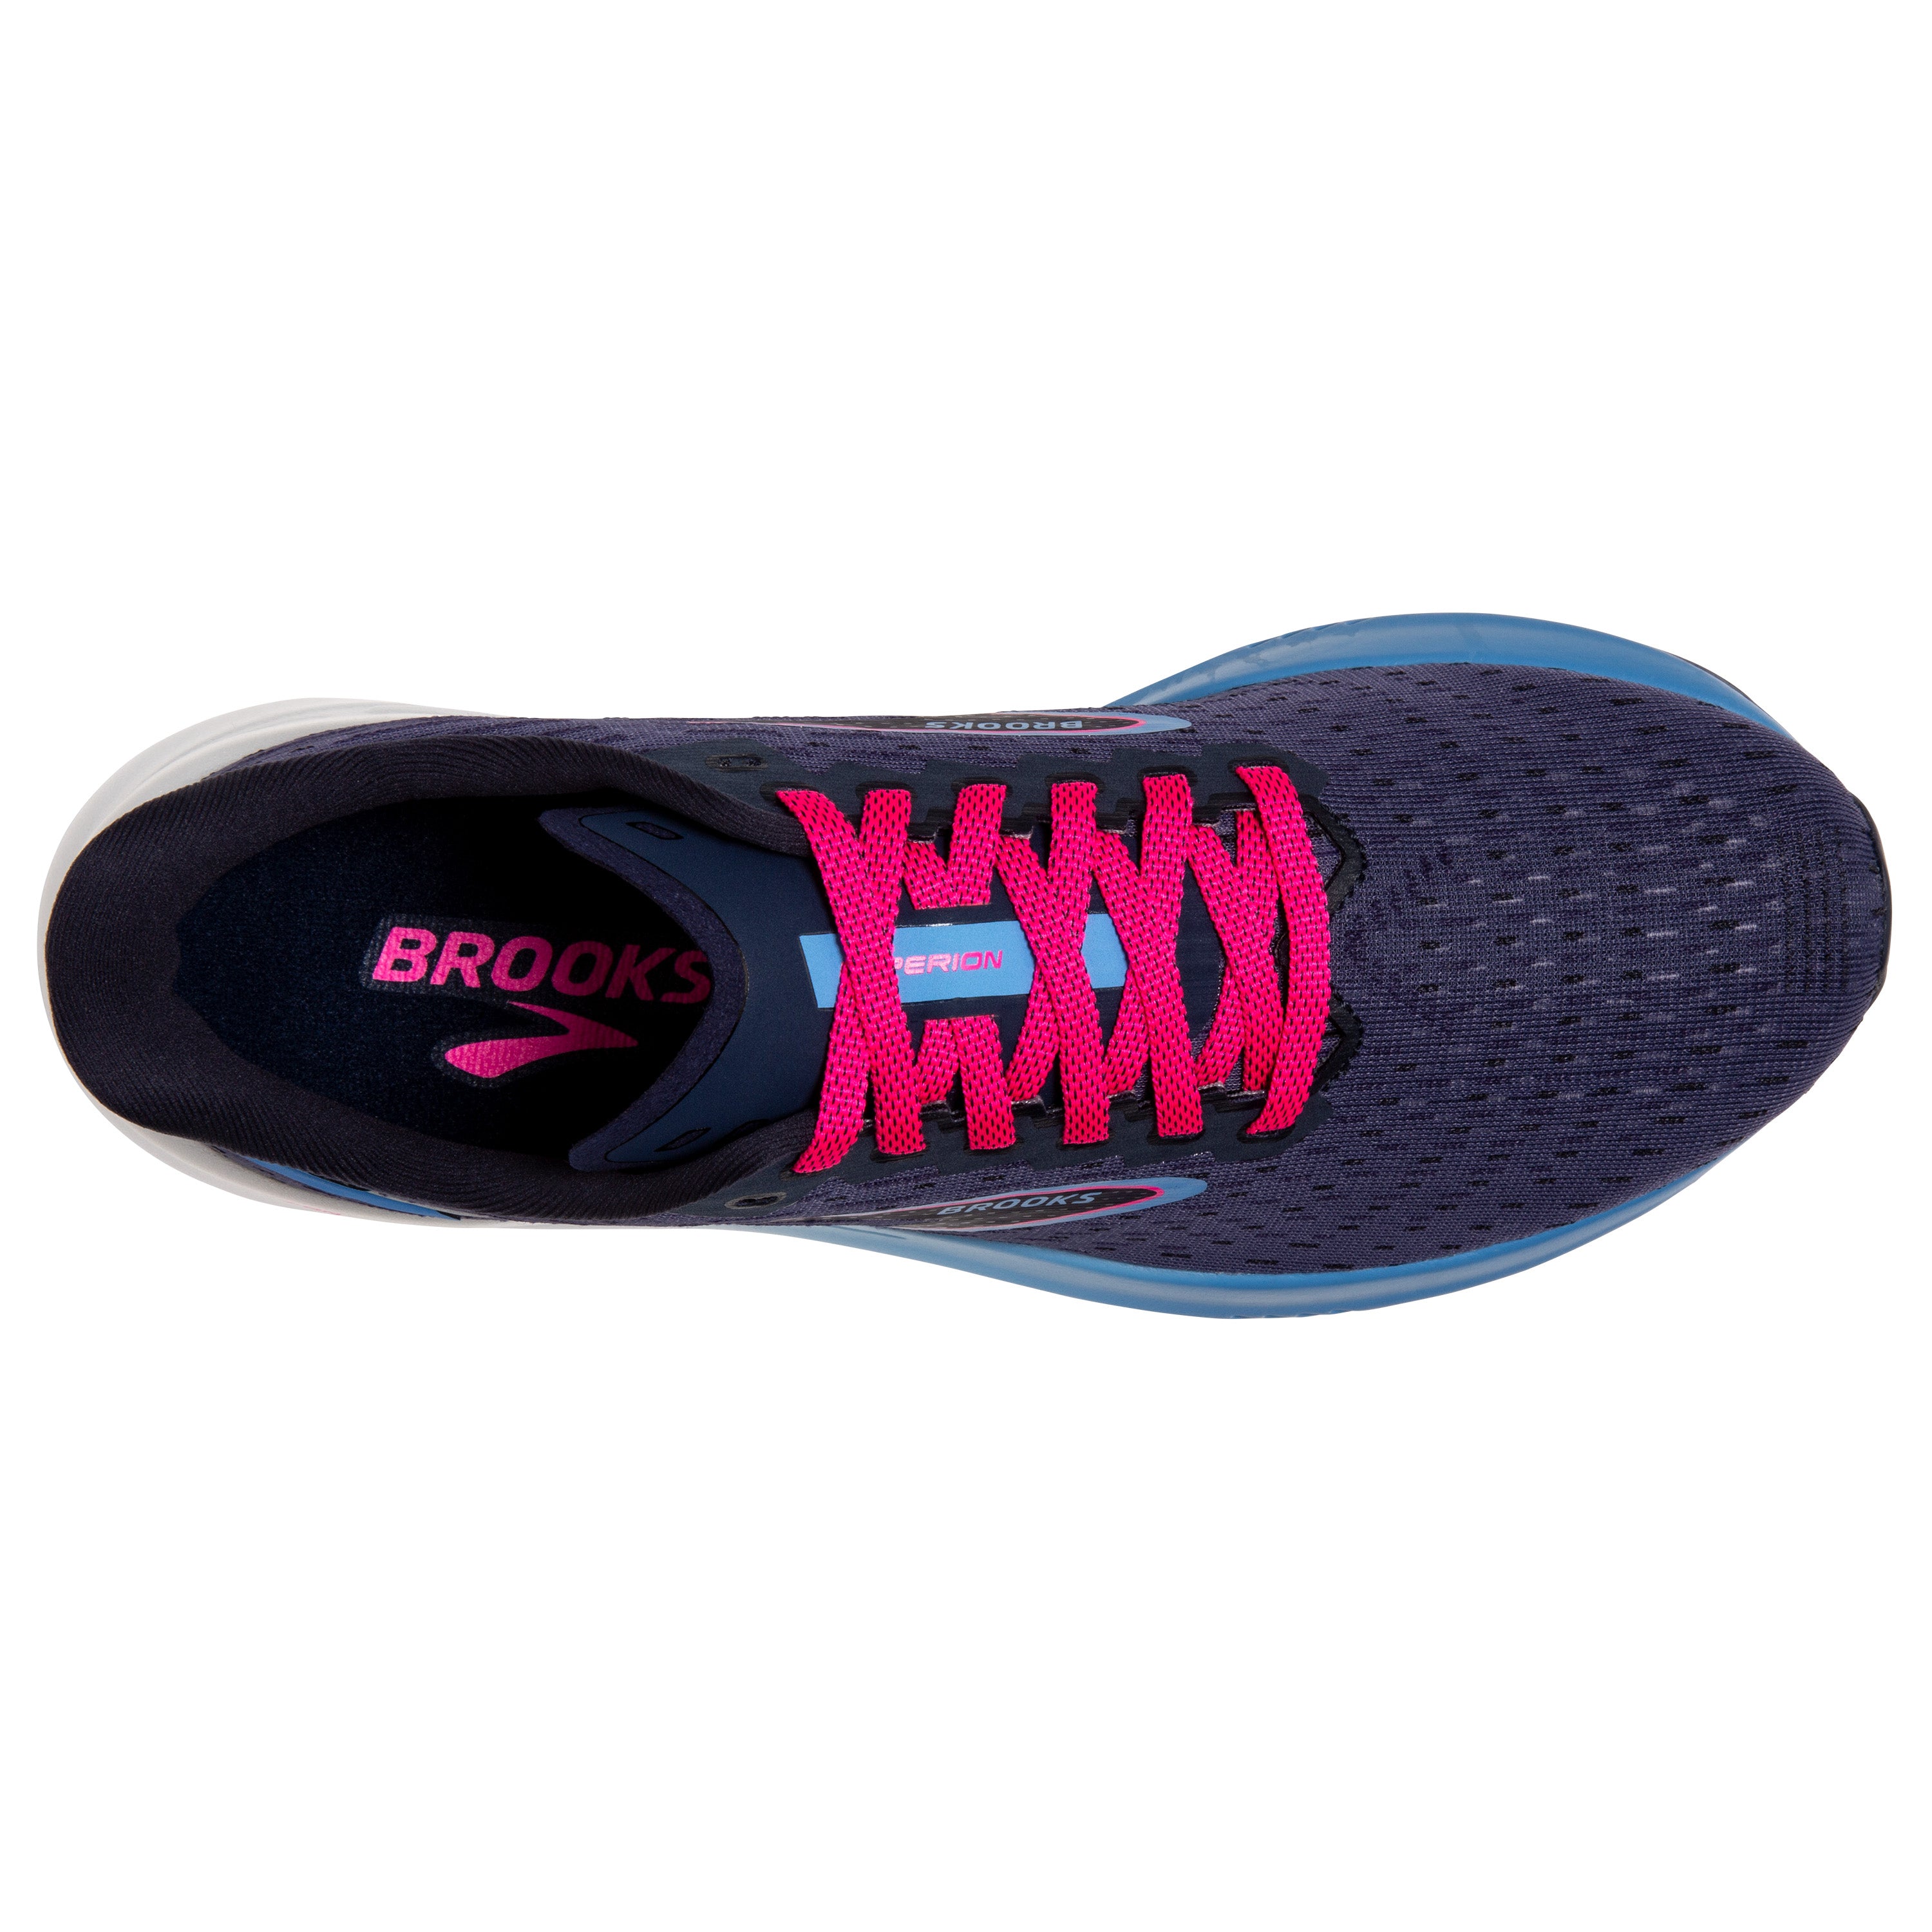 Hyperion - Women's Road Running Shoes